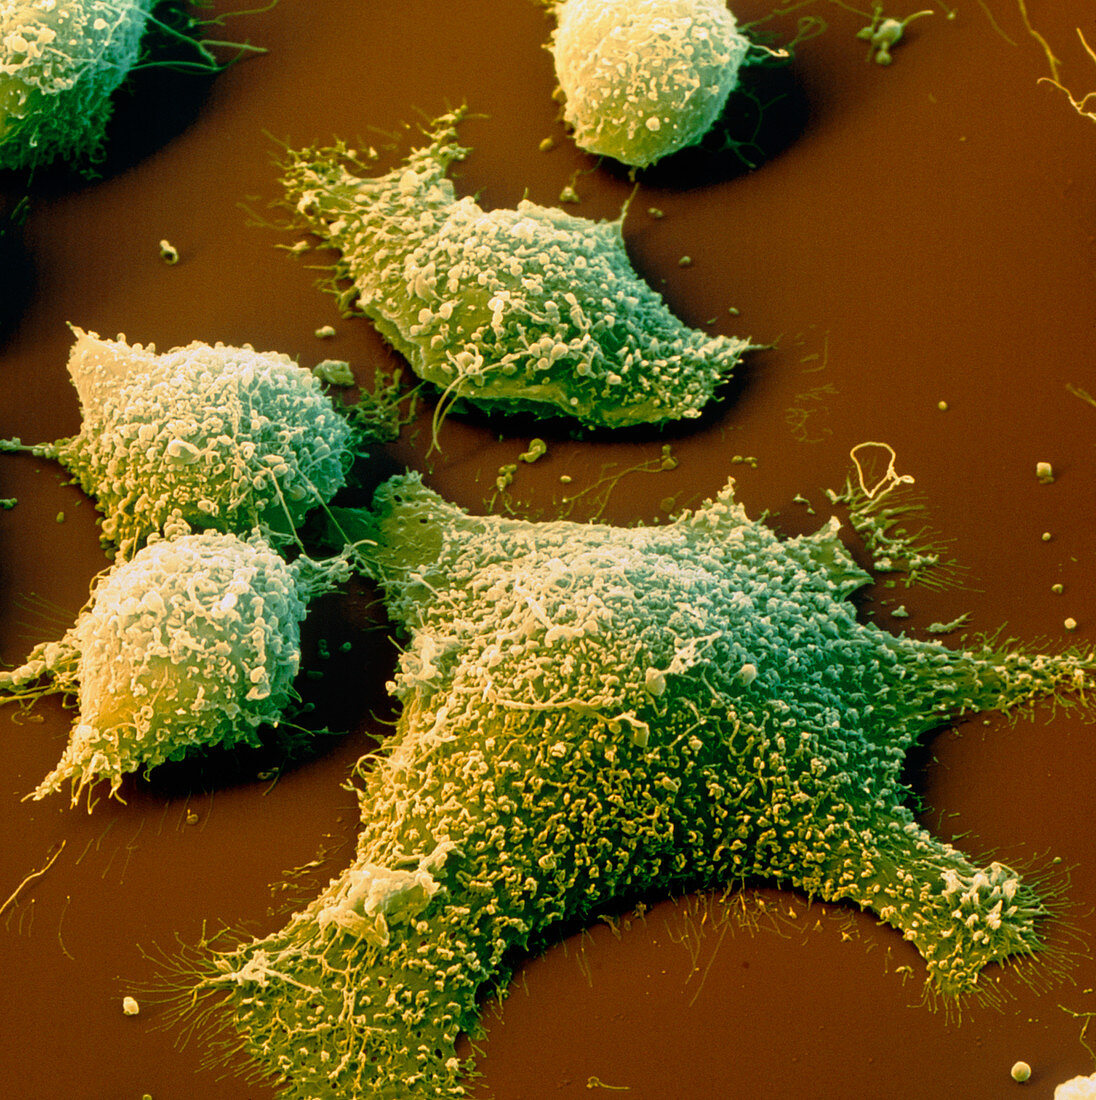 Coloured SEM of cancer cells from the colon